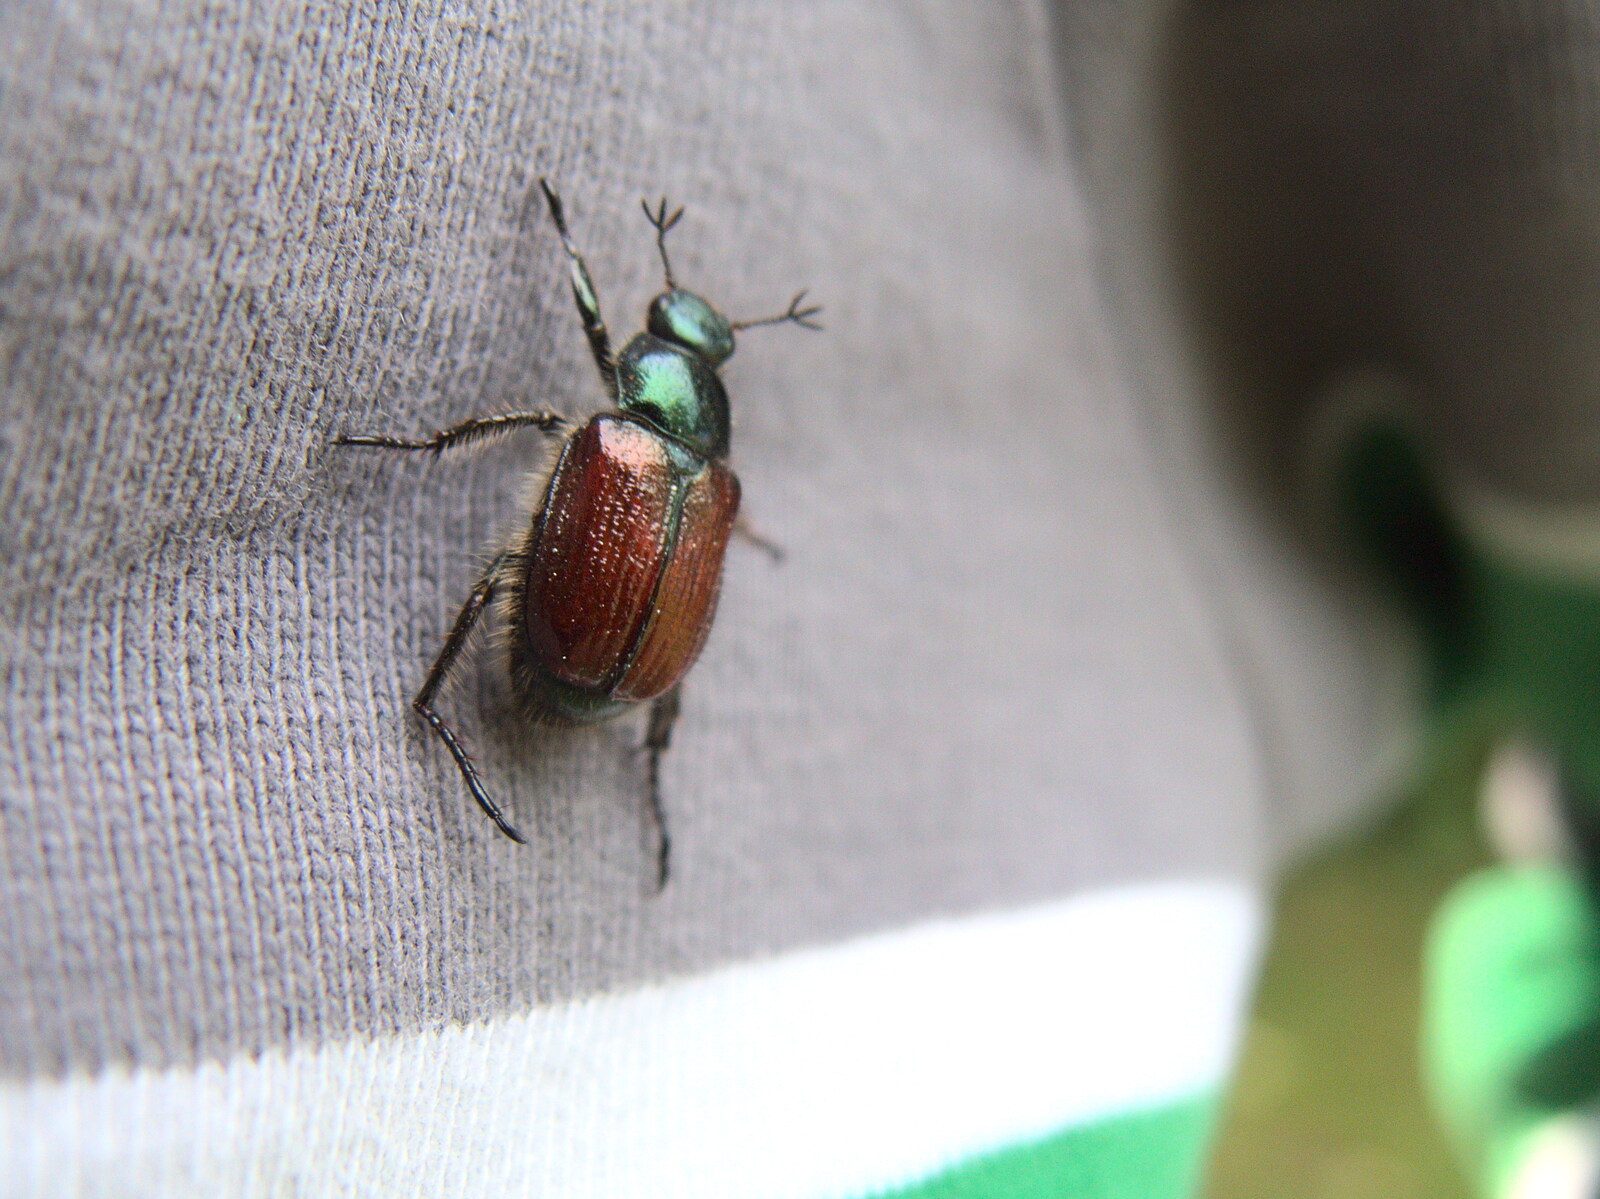 One of the flying beetles, with trident antennae from Dower House Camping, West Harling, Norfolk - 27th May 2018